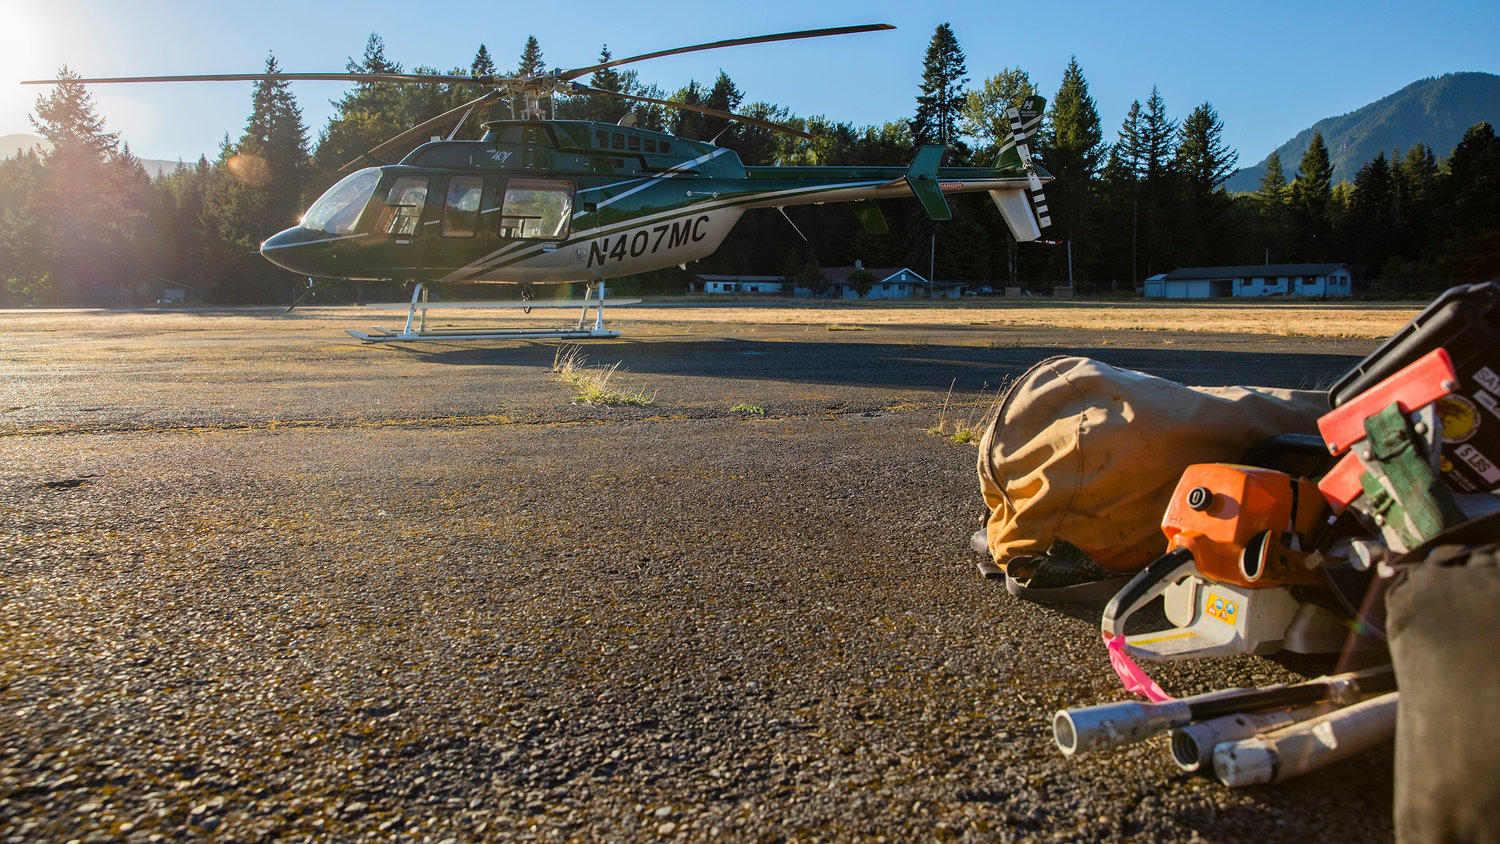 A helicopter used for reconnaissance sits on standby near picks and saws Tuesday evening at the Packwood Airport.